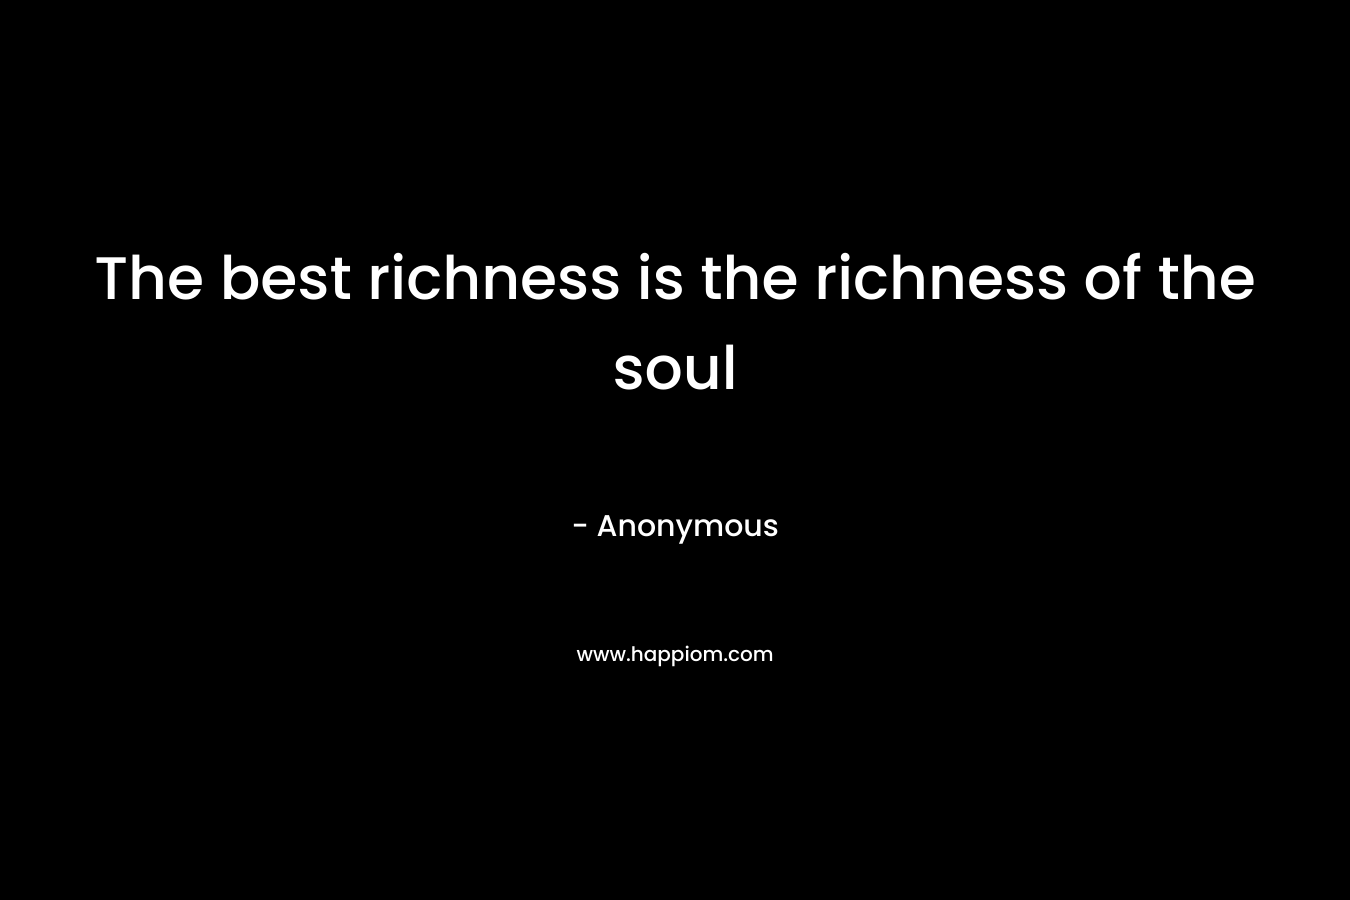 The best richness is the richness of the soul